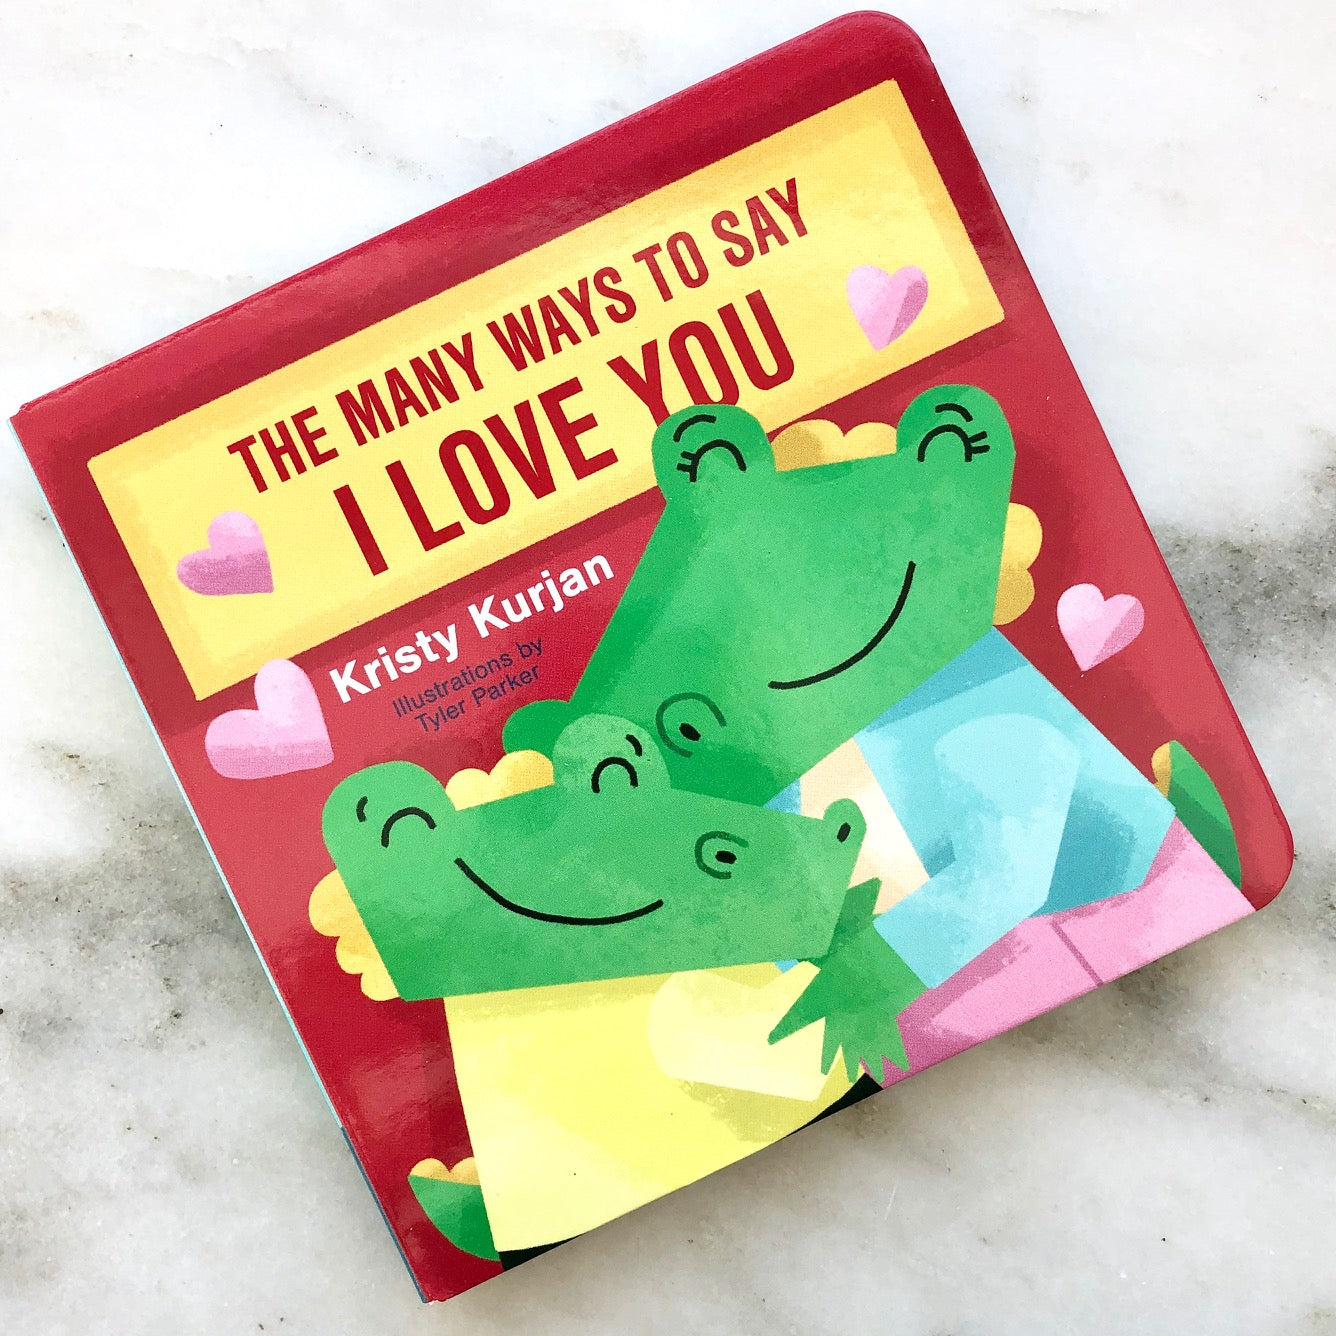 The Many Ways To Say I Love You: Board Book